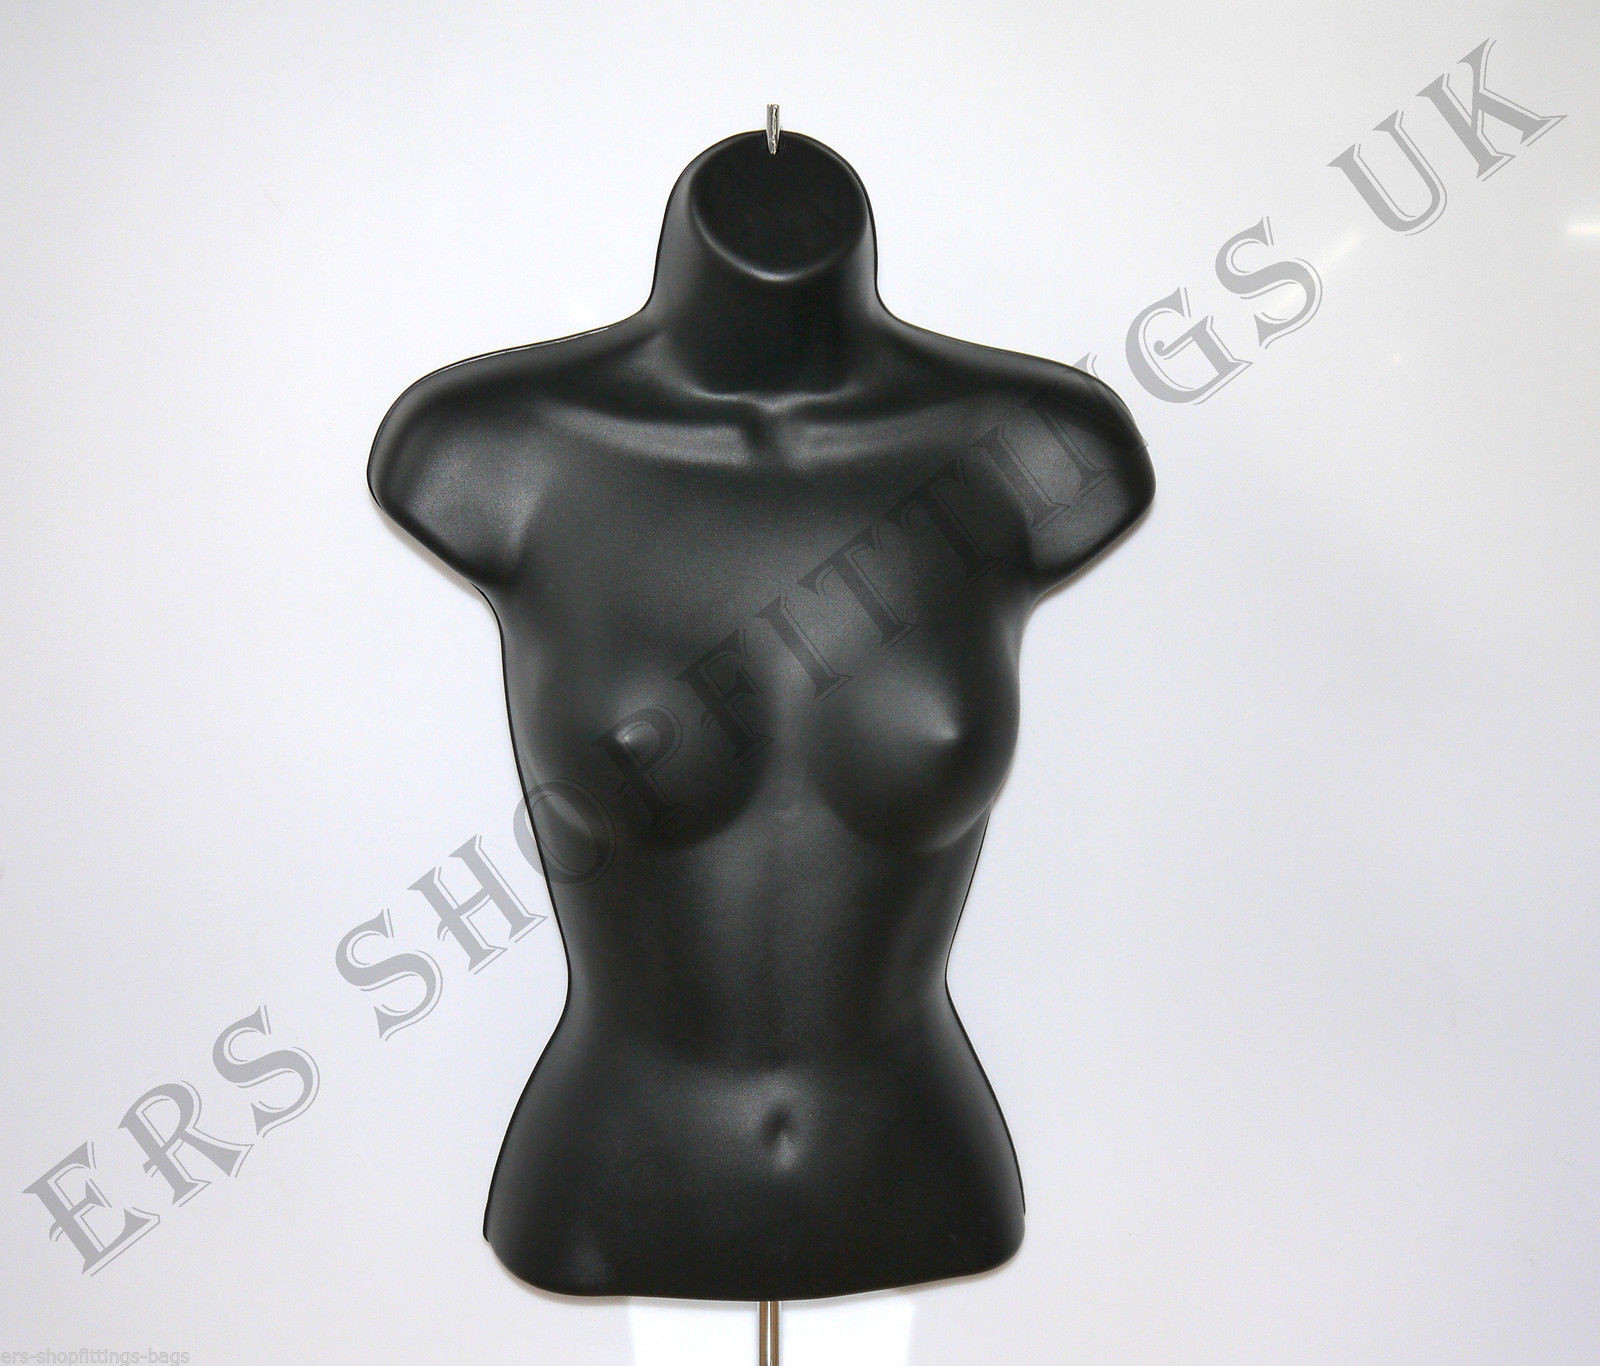 Female Hanging & Free Standing Body Shop Display Form Mannequin with ROUND STAND Black